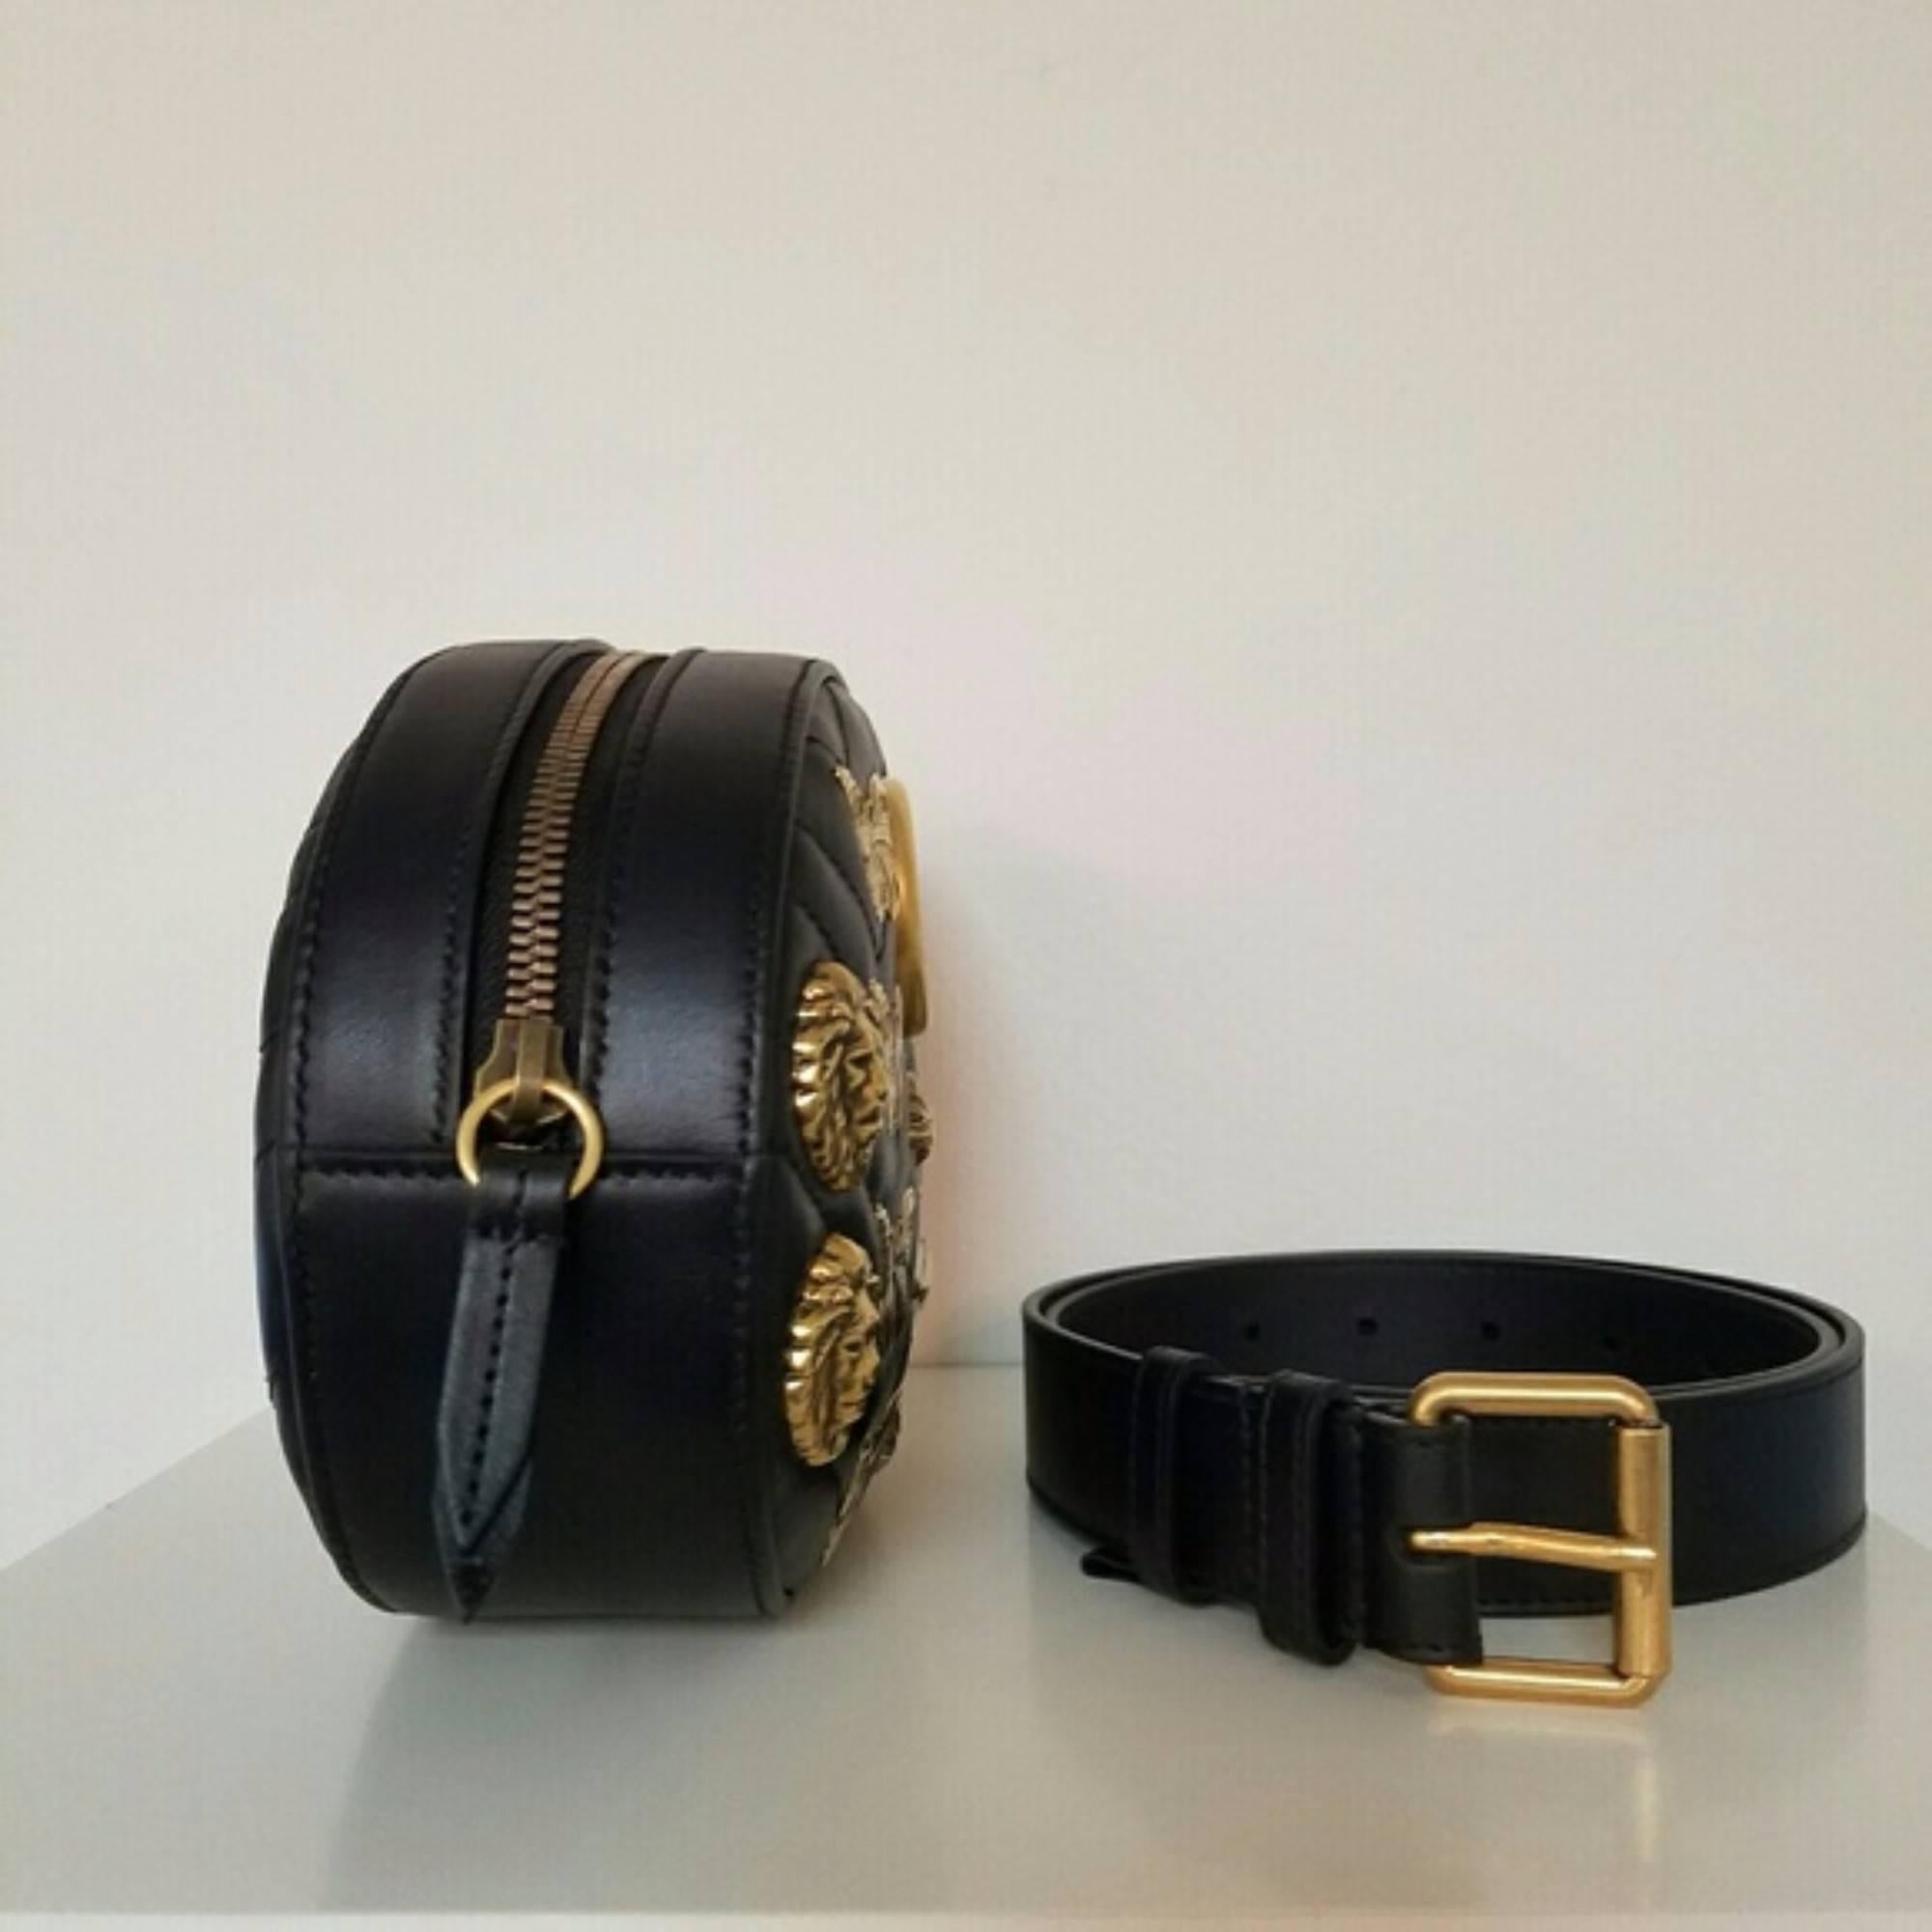 Gucci Matelasse Marmont Belt Bag (Black, Size - OS) In New Condition For Sale In Los Angeles, CA